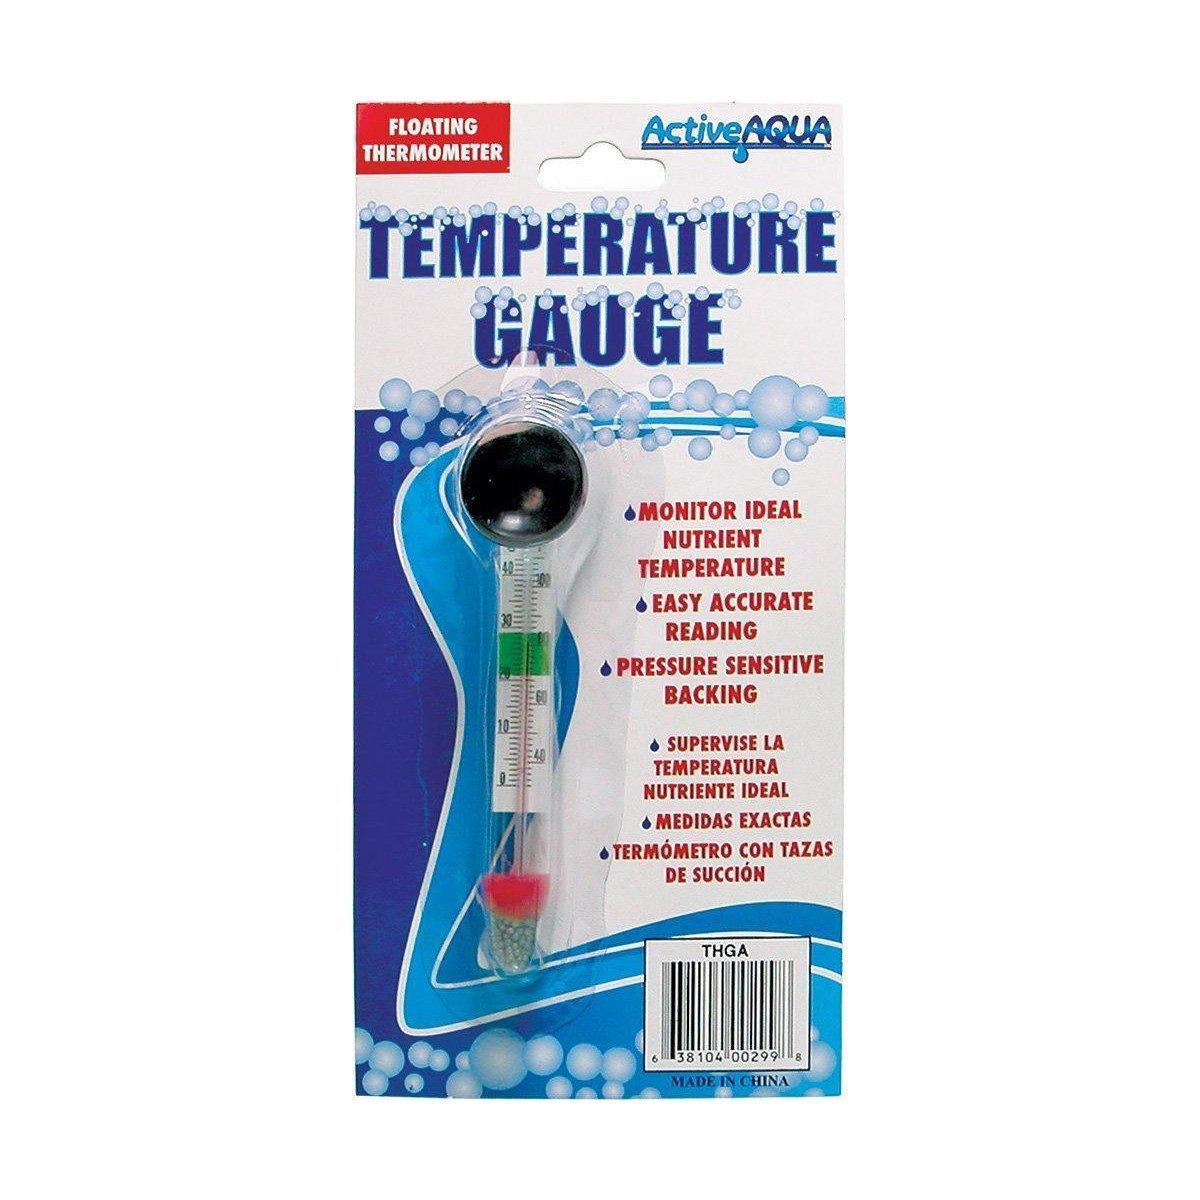 Observation, Measurement, Control - Active Aqua - Floating Thermometer - 638104002998- Gardin Warehouse